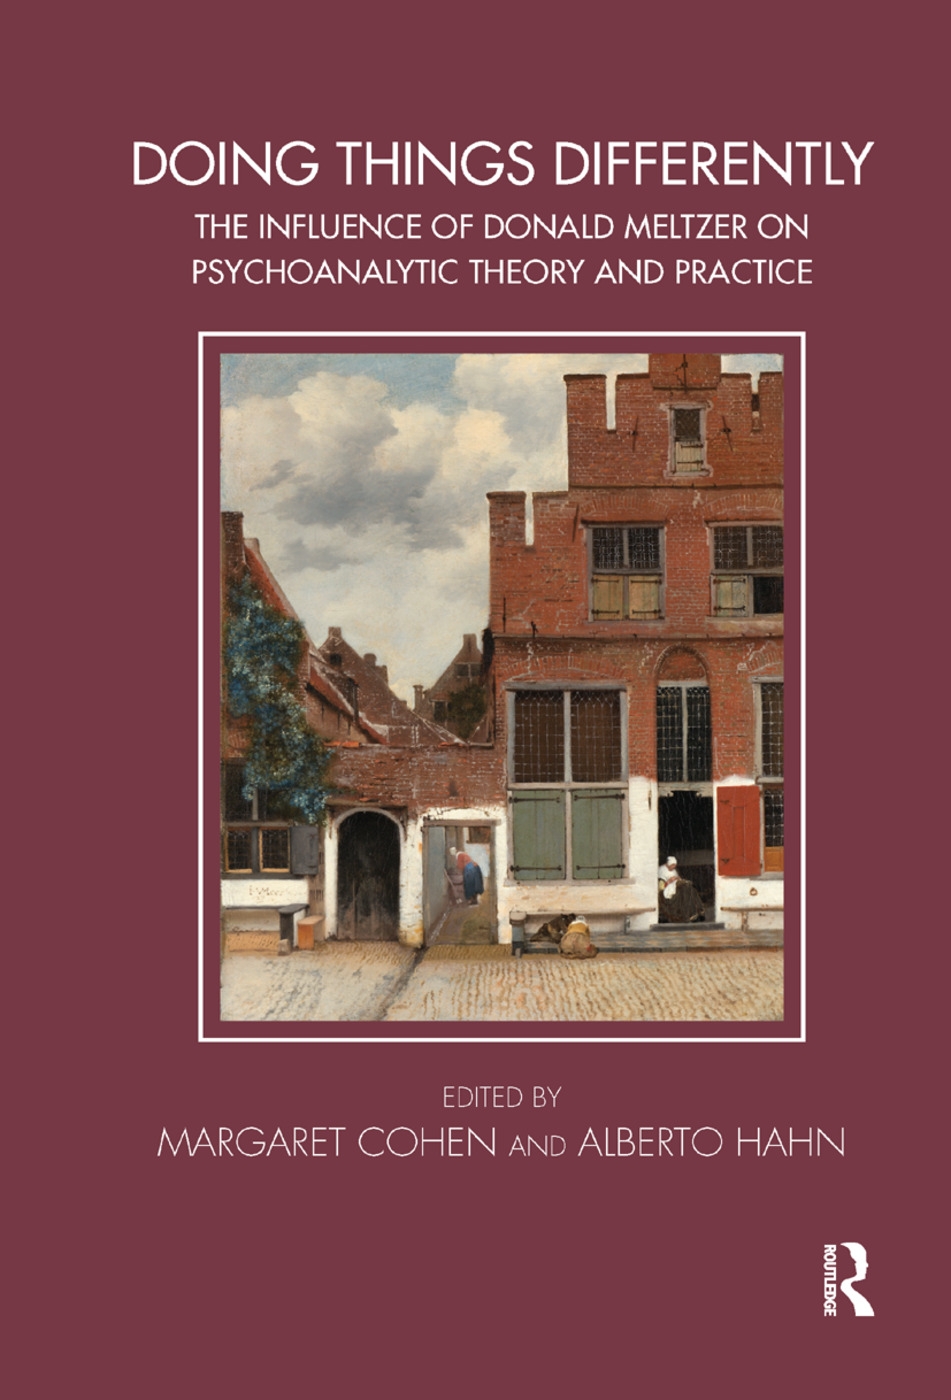 Doing Things Differently: The Influence of Donald Meltzer on Psychoanalytic Theory and Practice